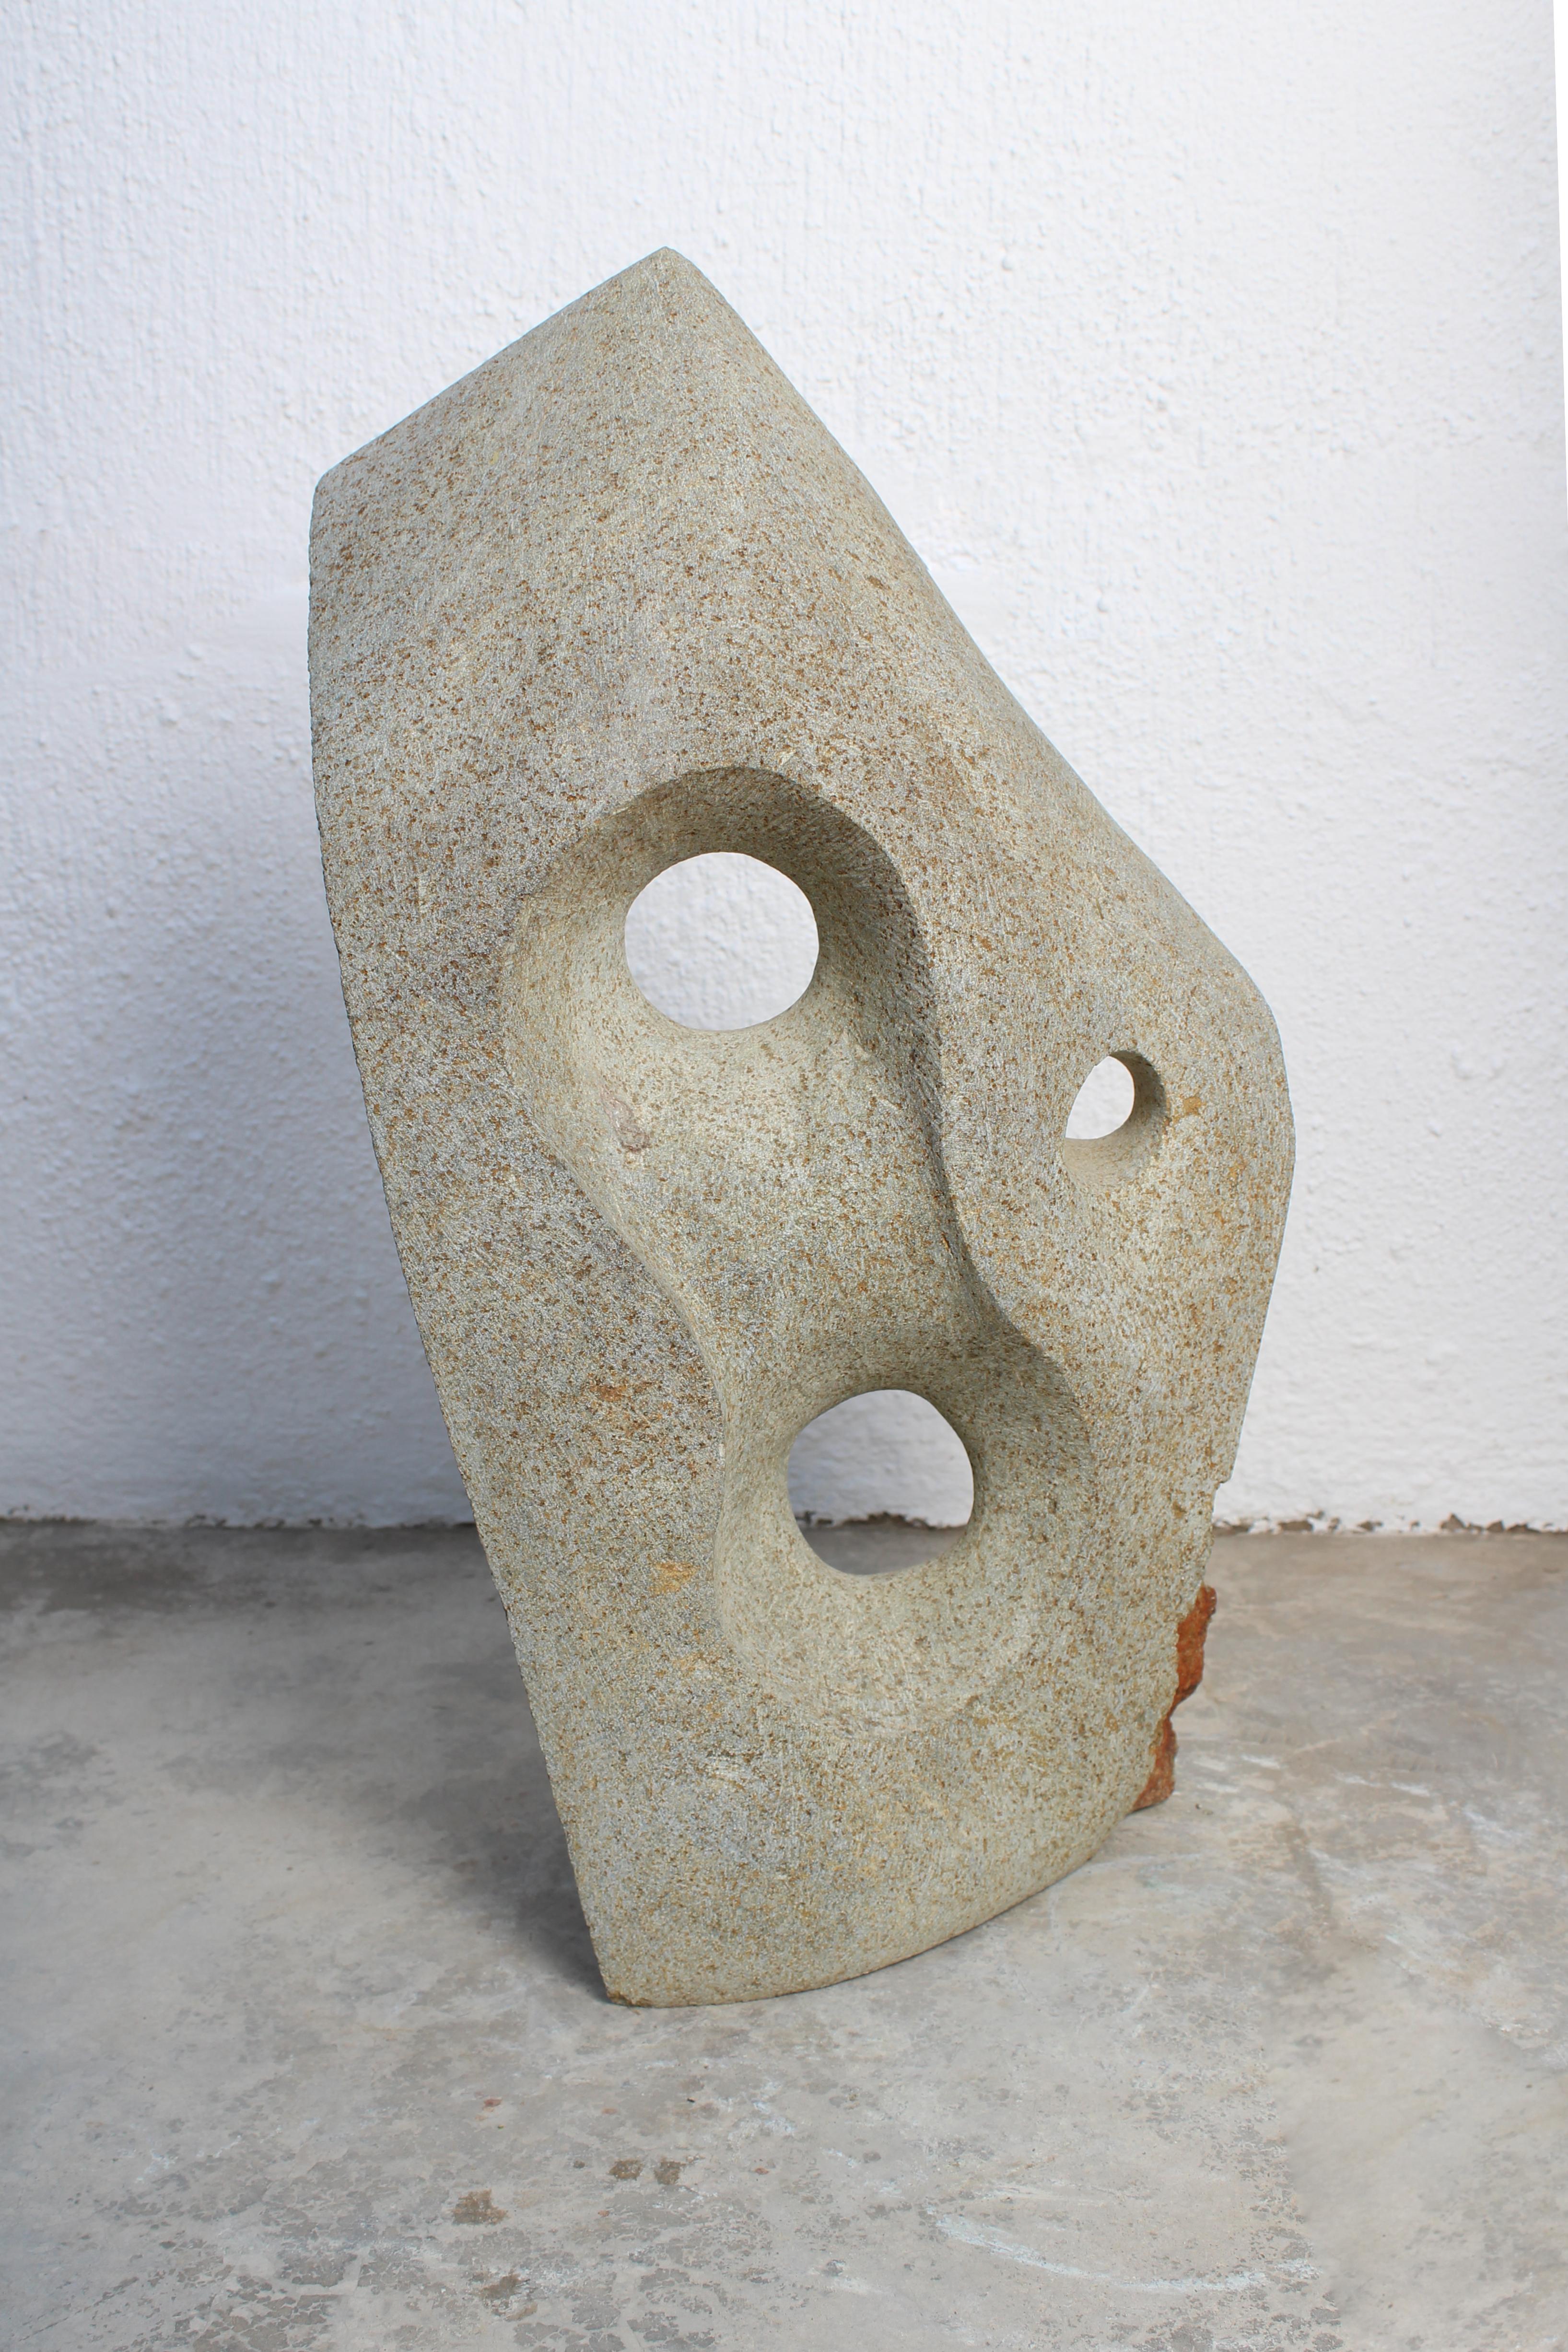 Anthill by Ismael Shivute, hand carved Namibian soapstone For Sale 4